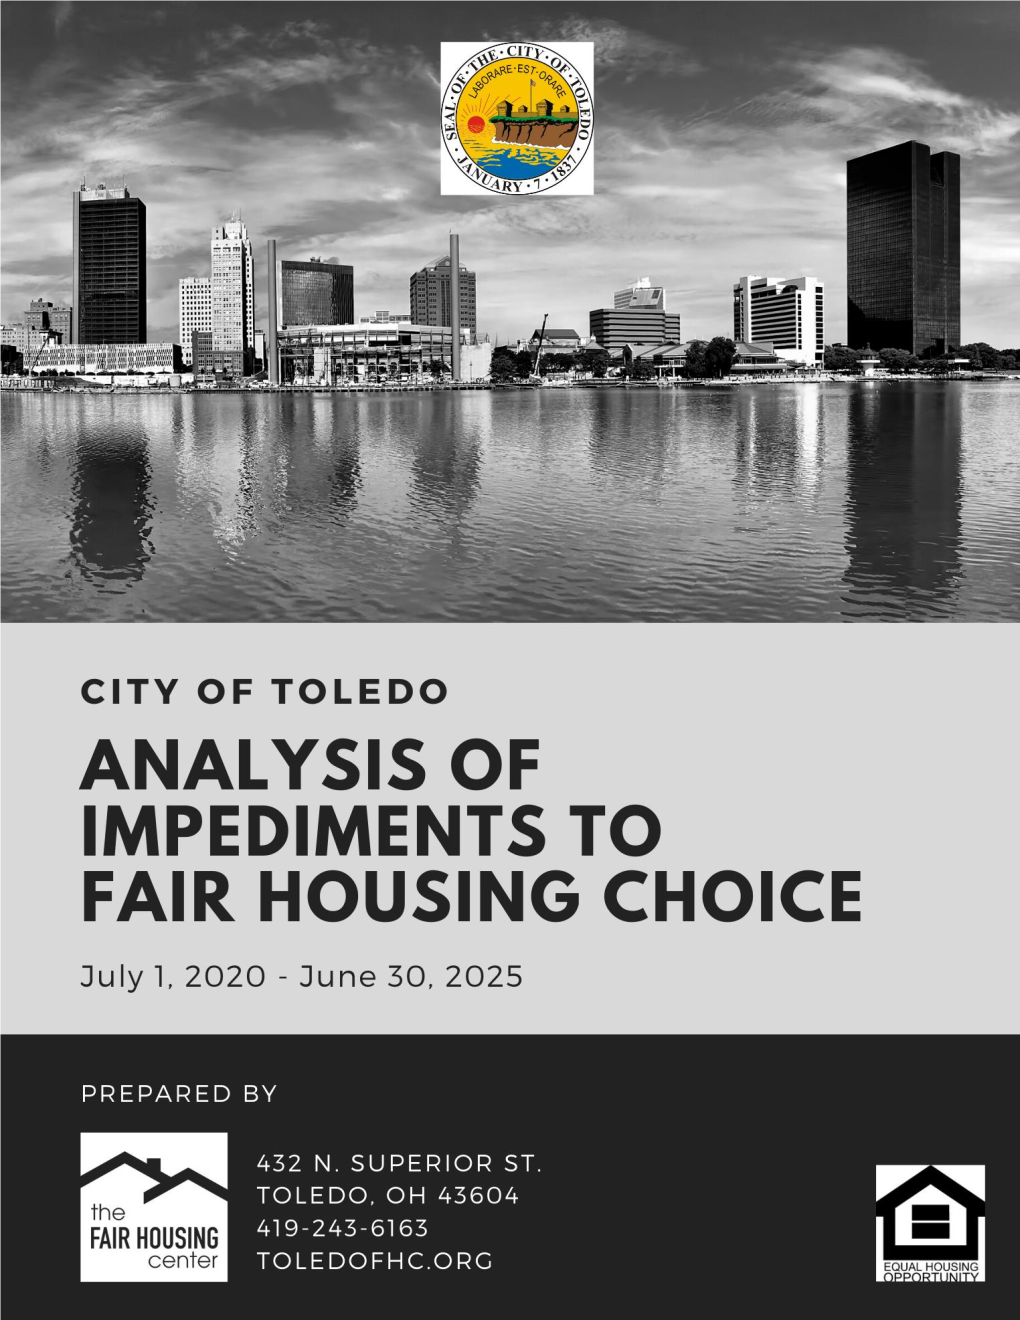 2020 Analysis of Impediments, City of Toledo Prepared by the Fair Housing Center 2